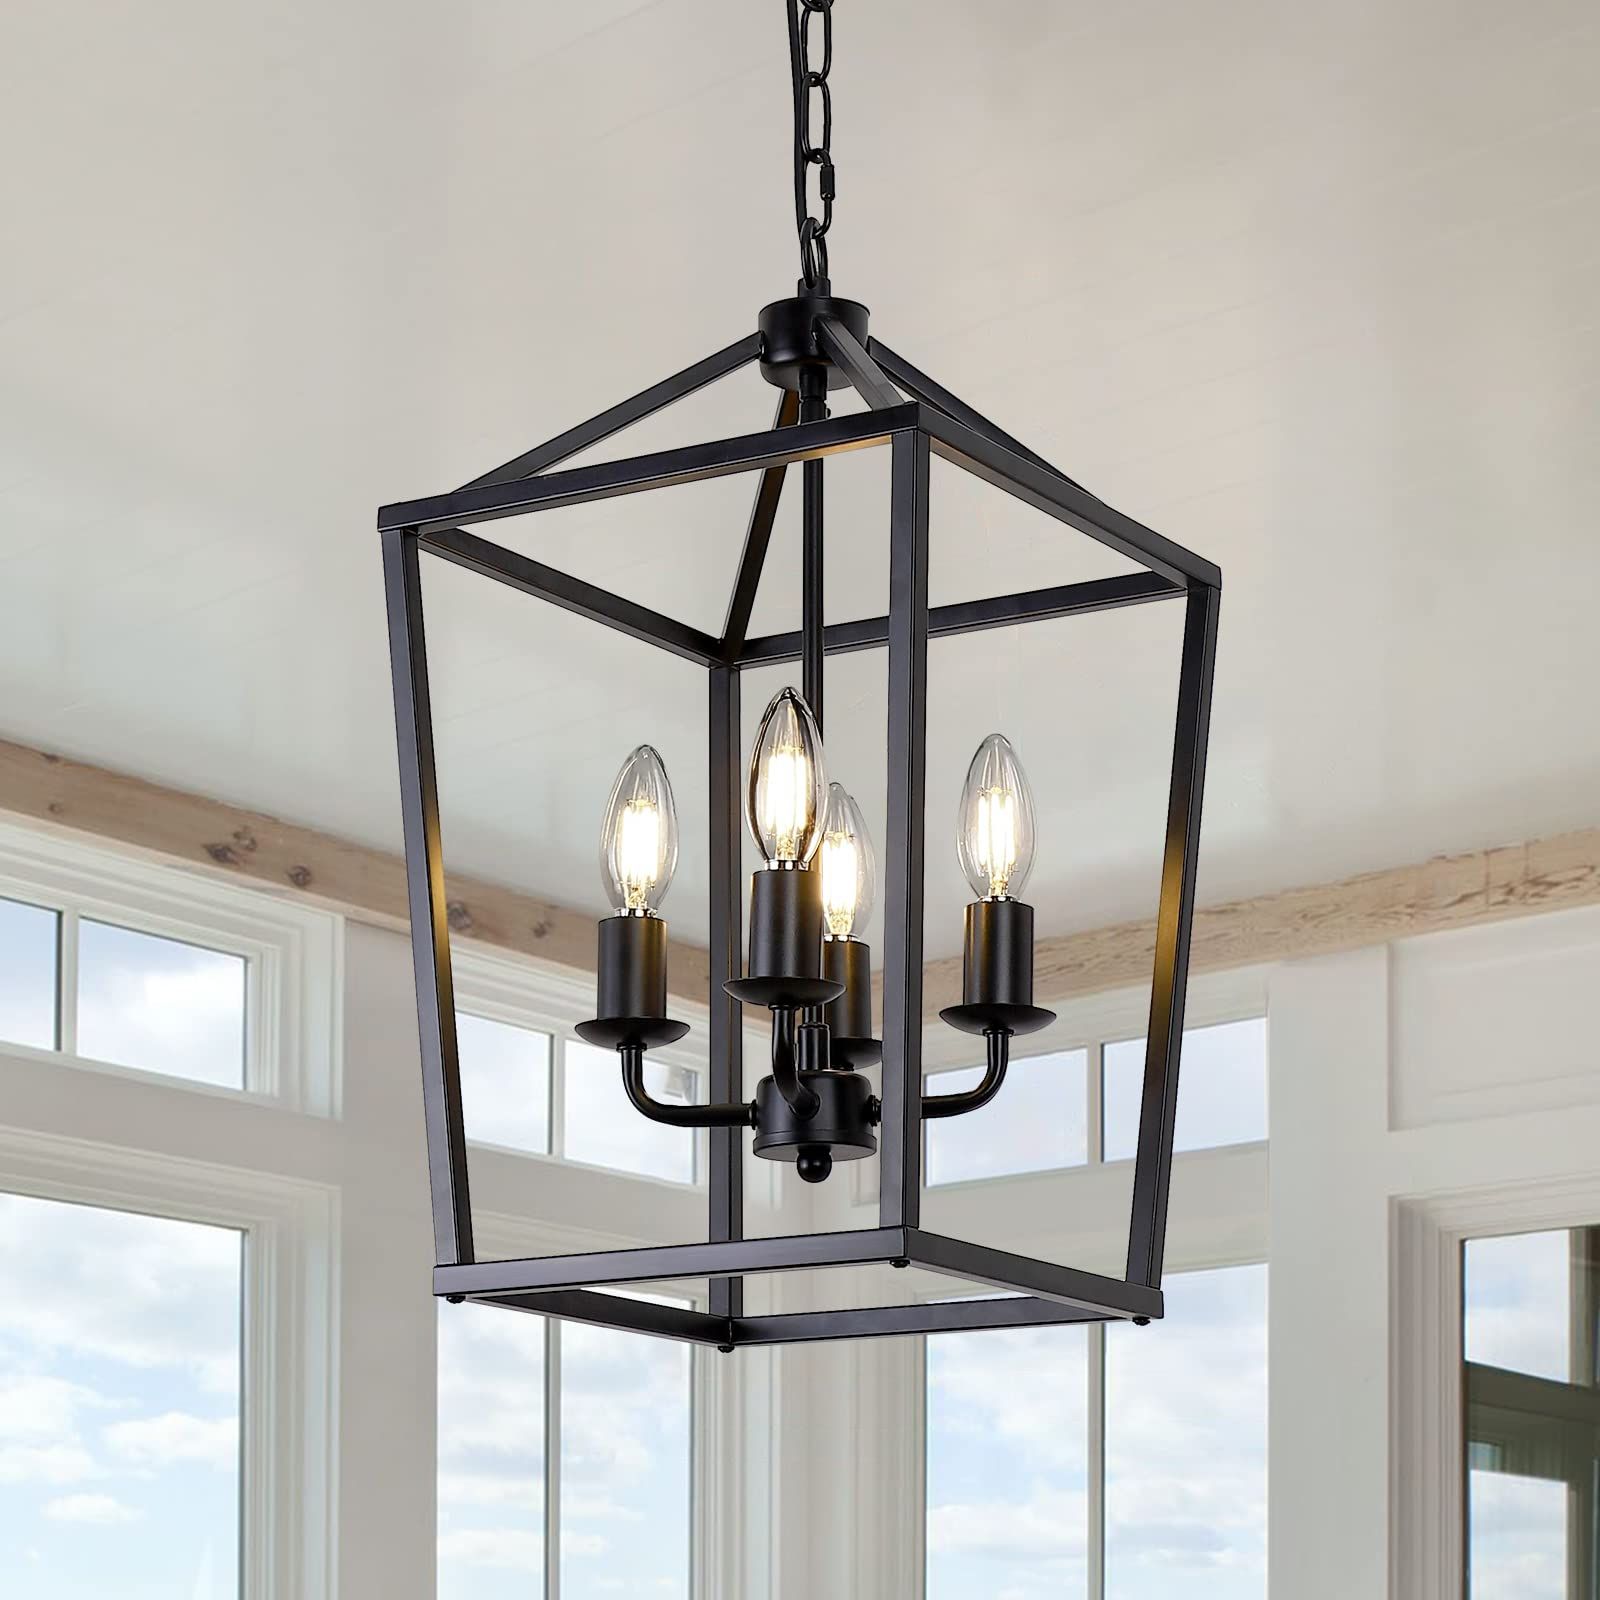 Widely Used 4 Light Black Farmhouse Chandelier Light Fixture Iron Lantern Pendant Light  Metal Cage Kitchen Hanging Light Fixtures For Kitchen Island, Dining Room,  Entryway, Foyer, Hallway – – Amazon With Blackened Iron Lantern Chandeliers (View 1 of 10)